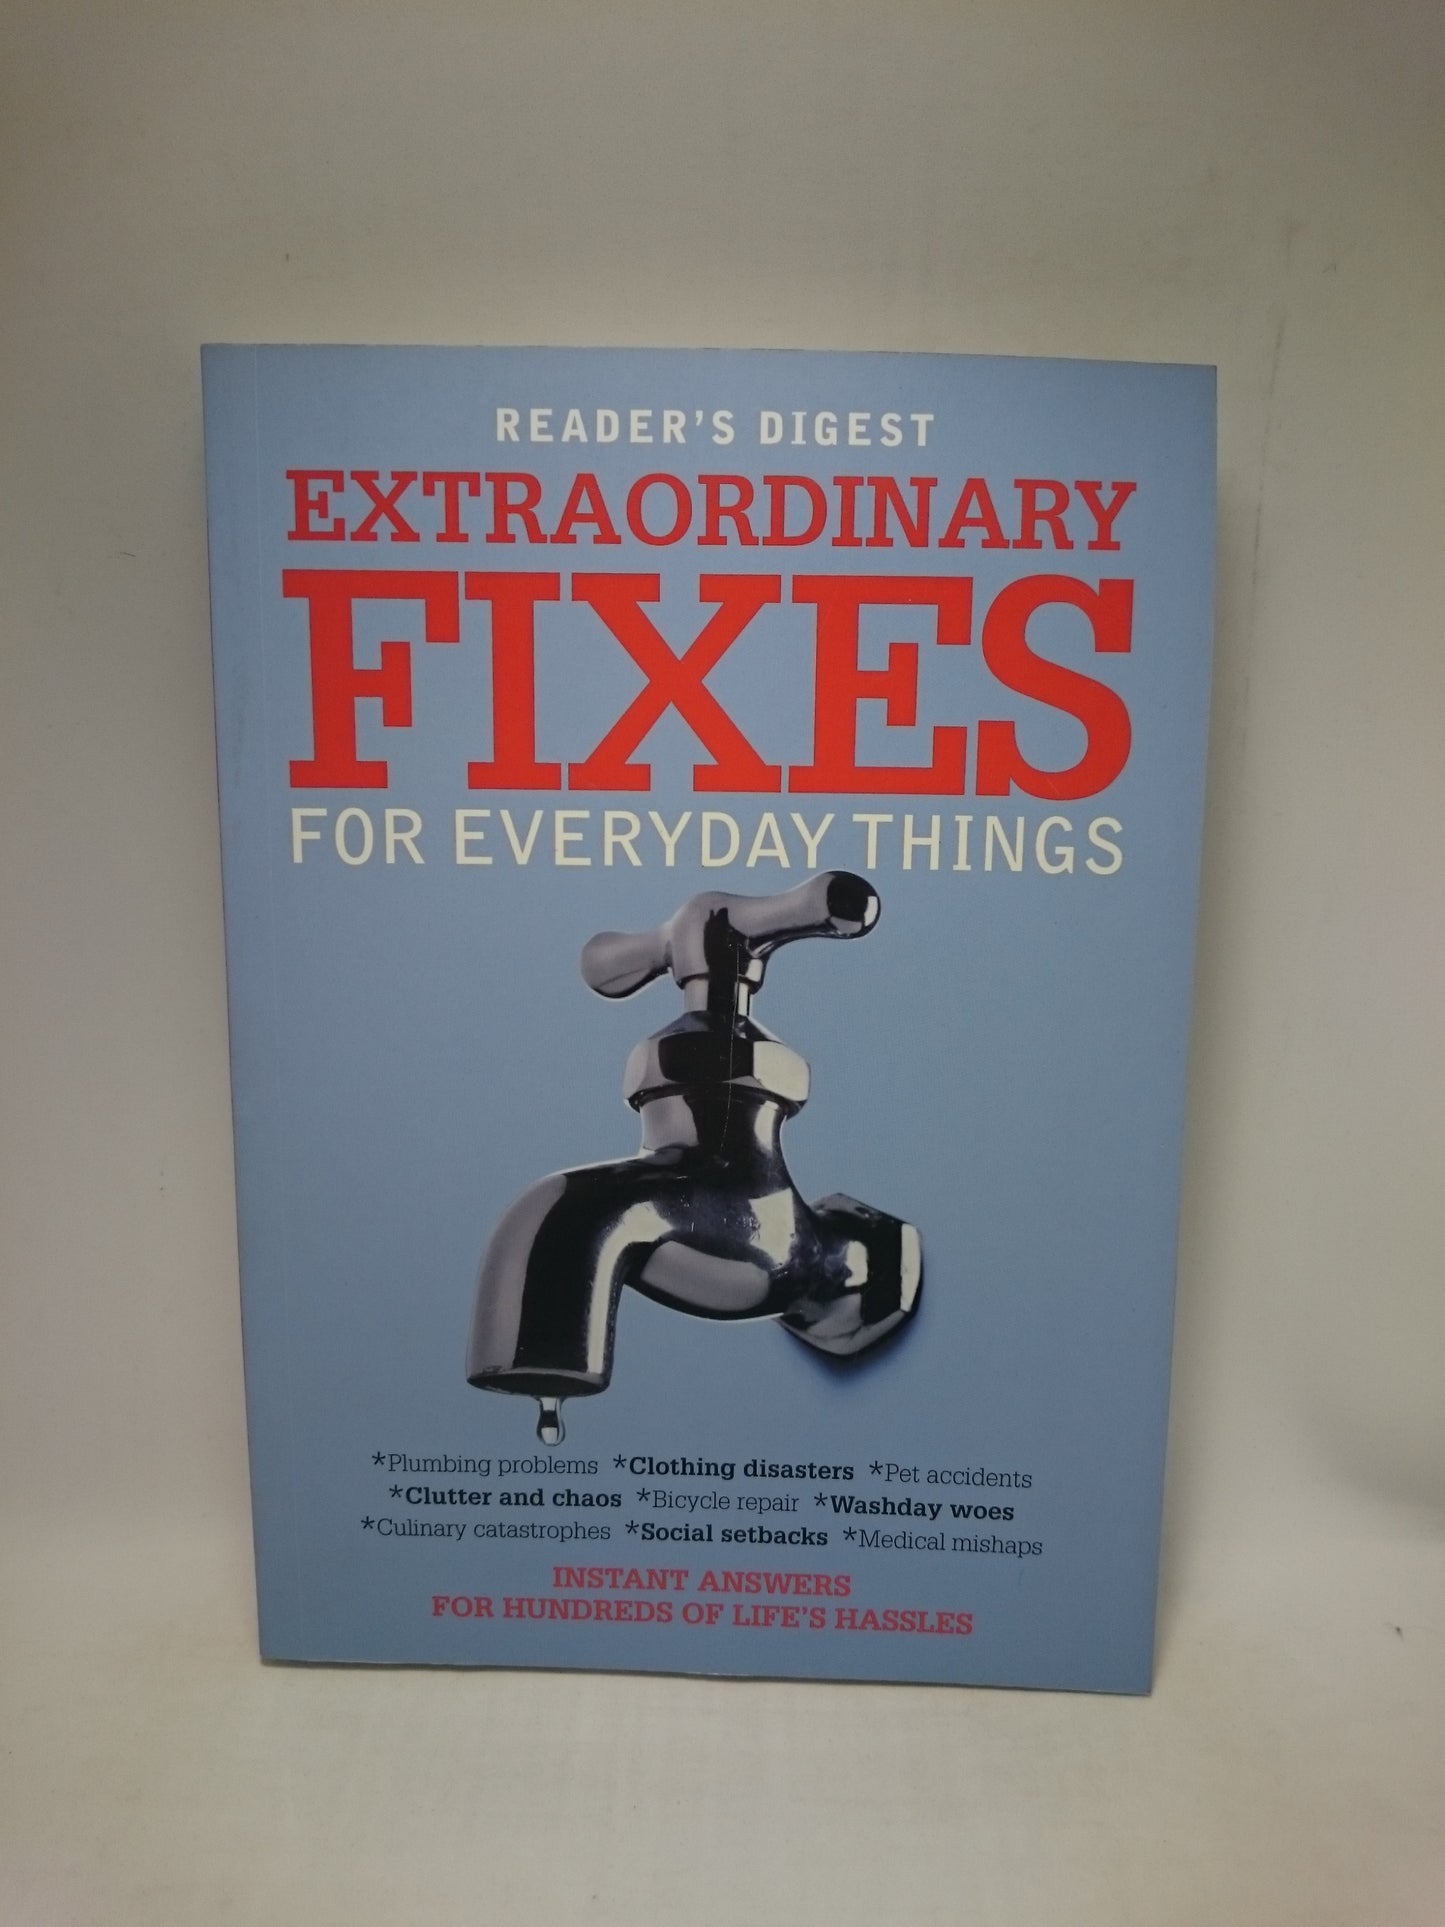 Extraordinary Fixes for Everyday Things: Instant Answers for Hundreds of Everyday Hassles